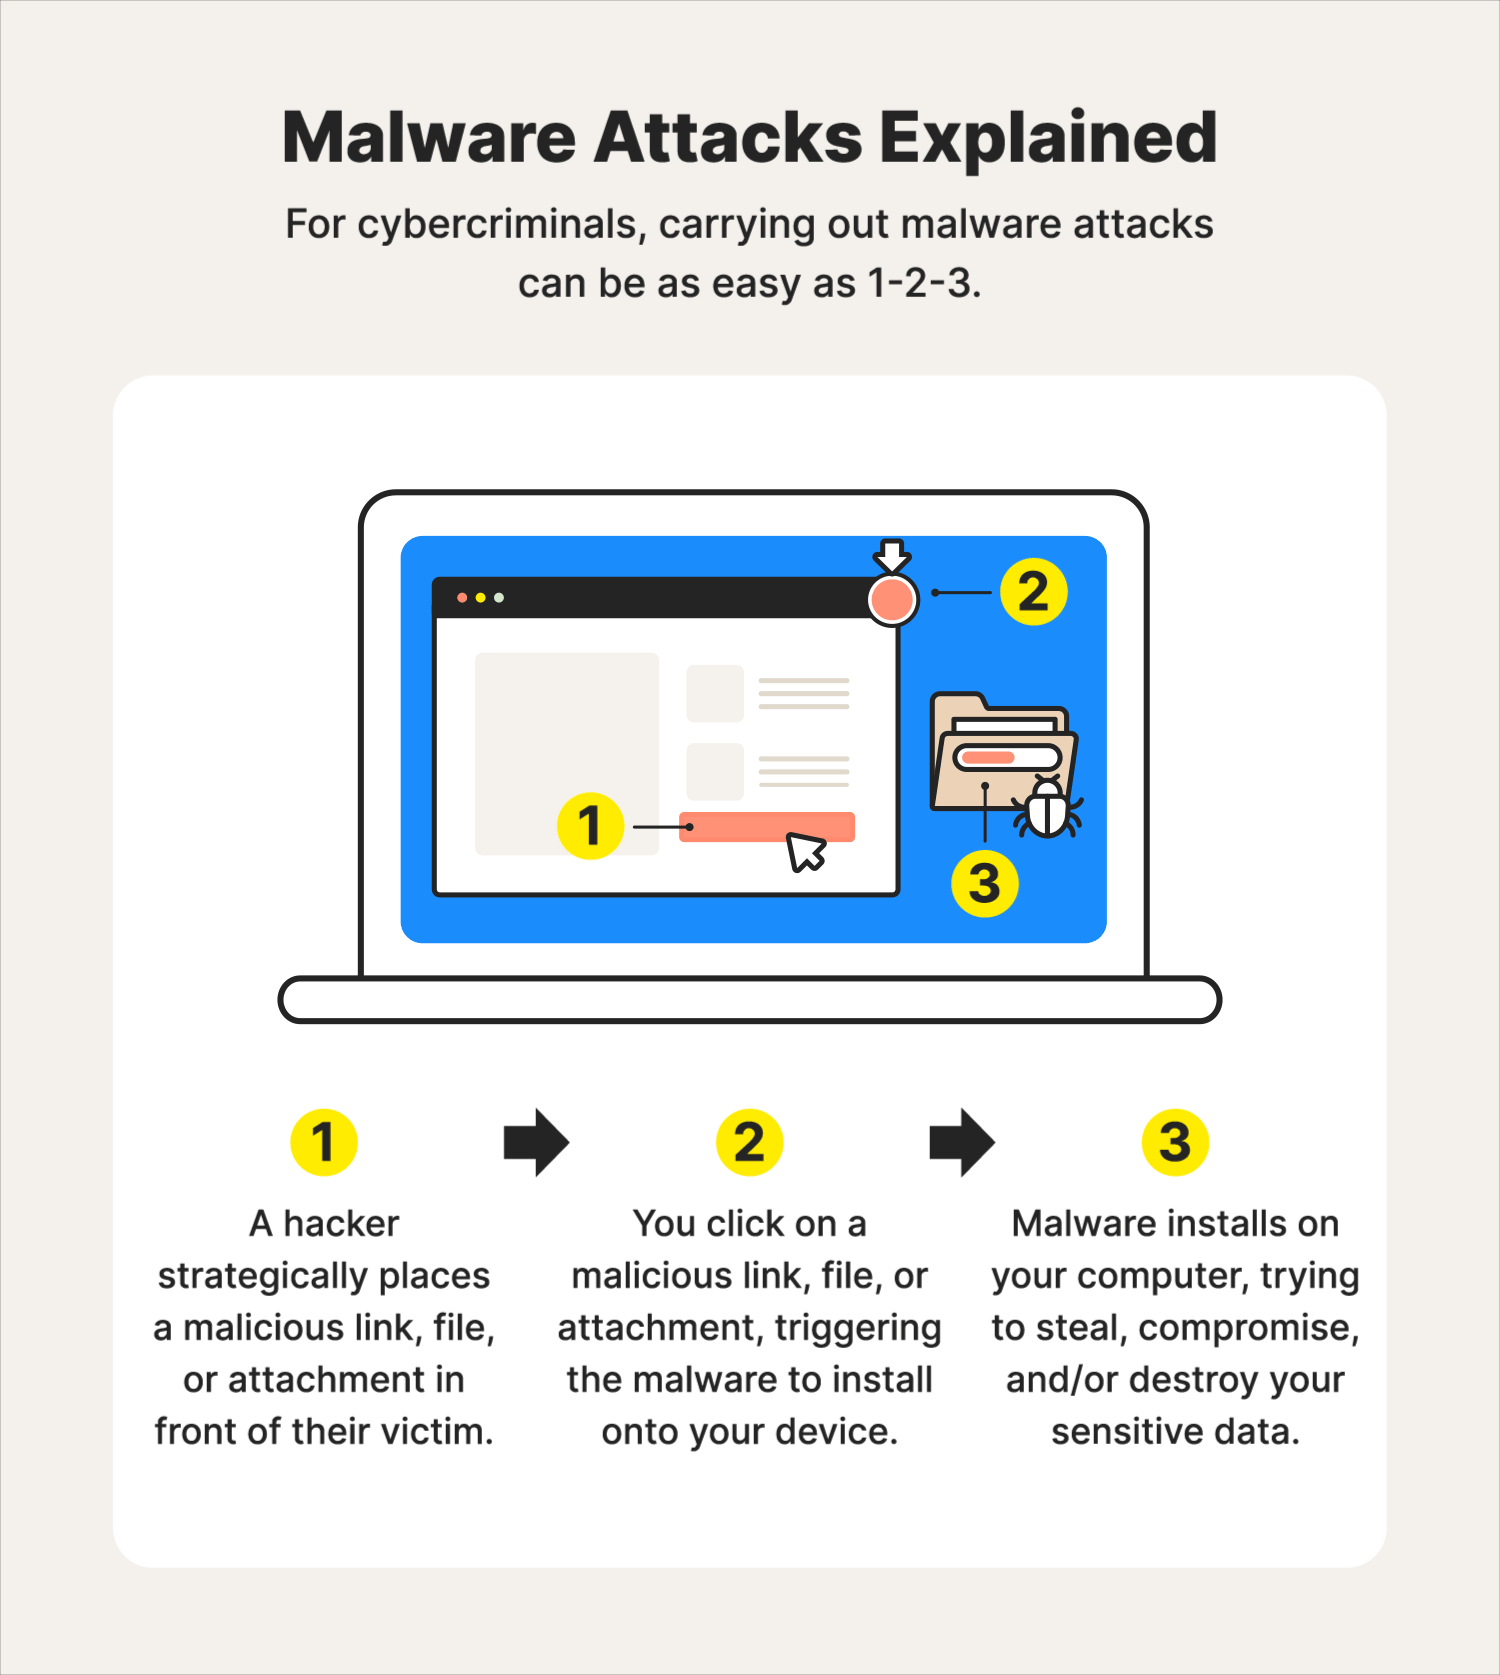  An animated illustration accompanies the steps hackers take to infect devices with malware.